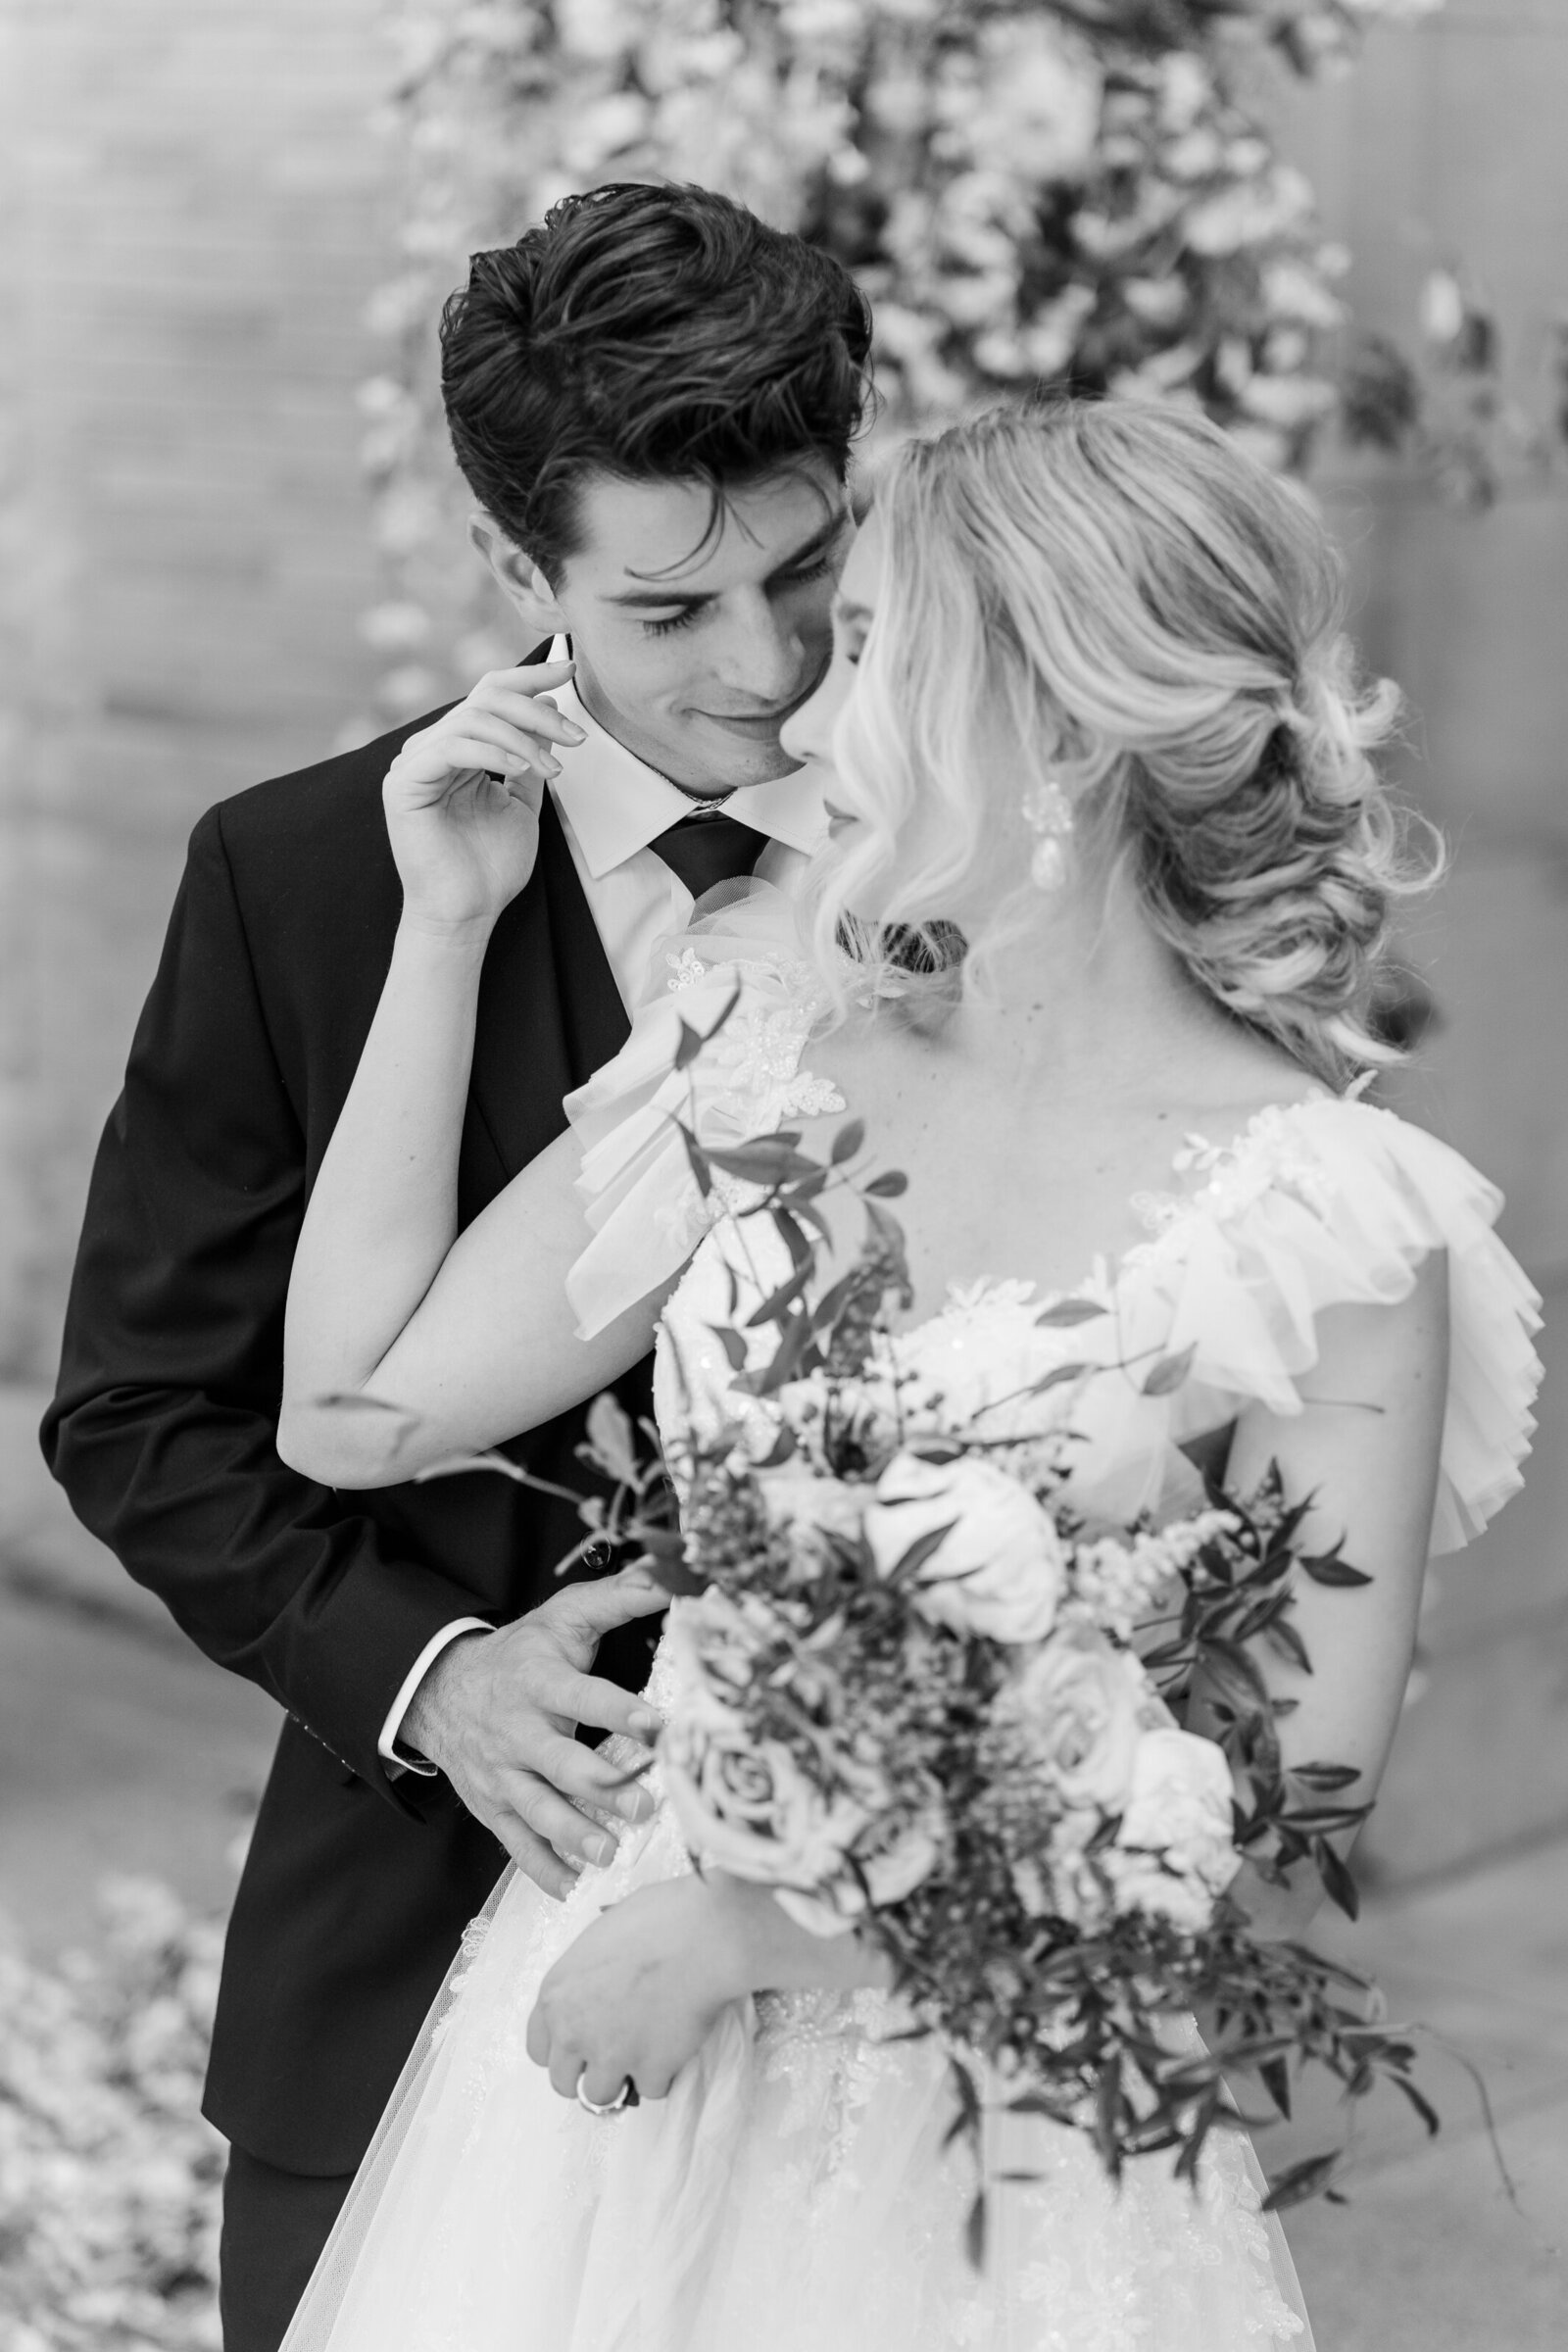 Close up portrait of bride and groom in black and white